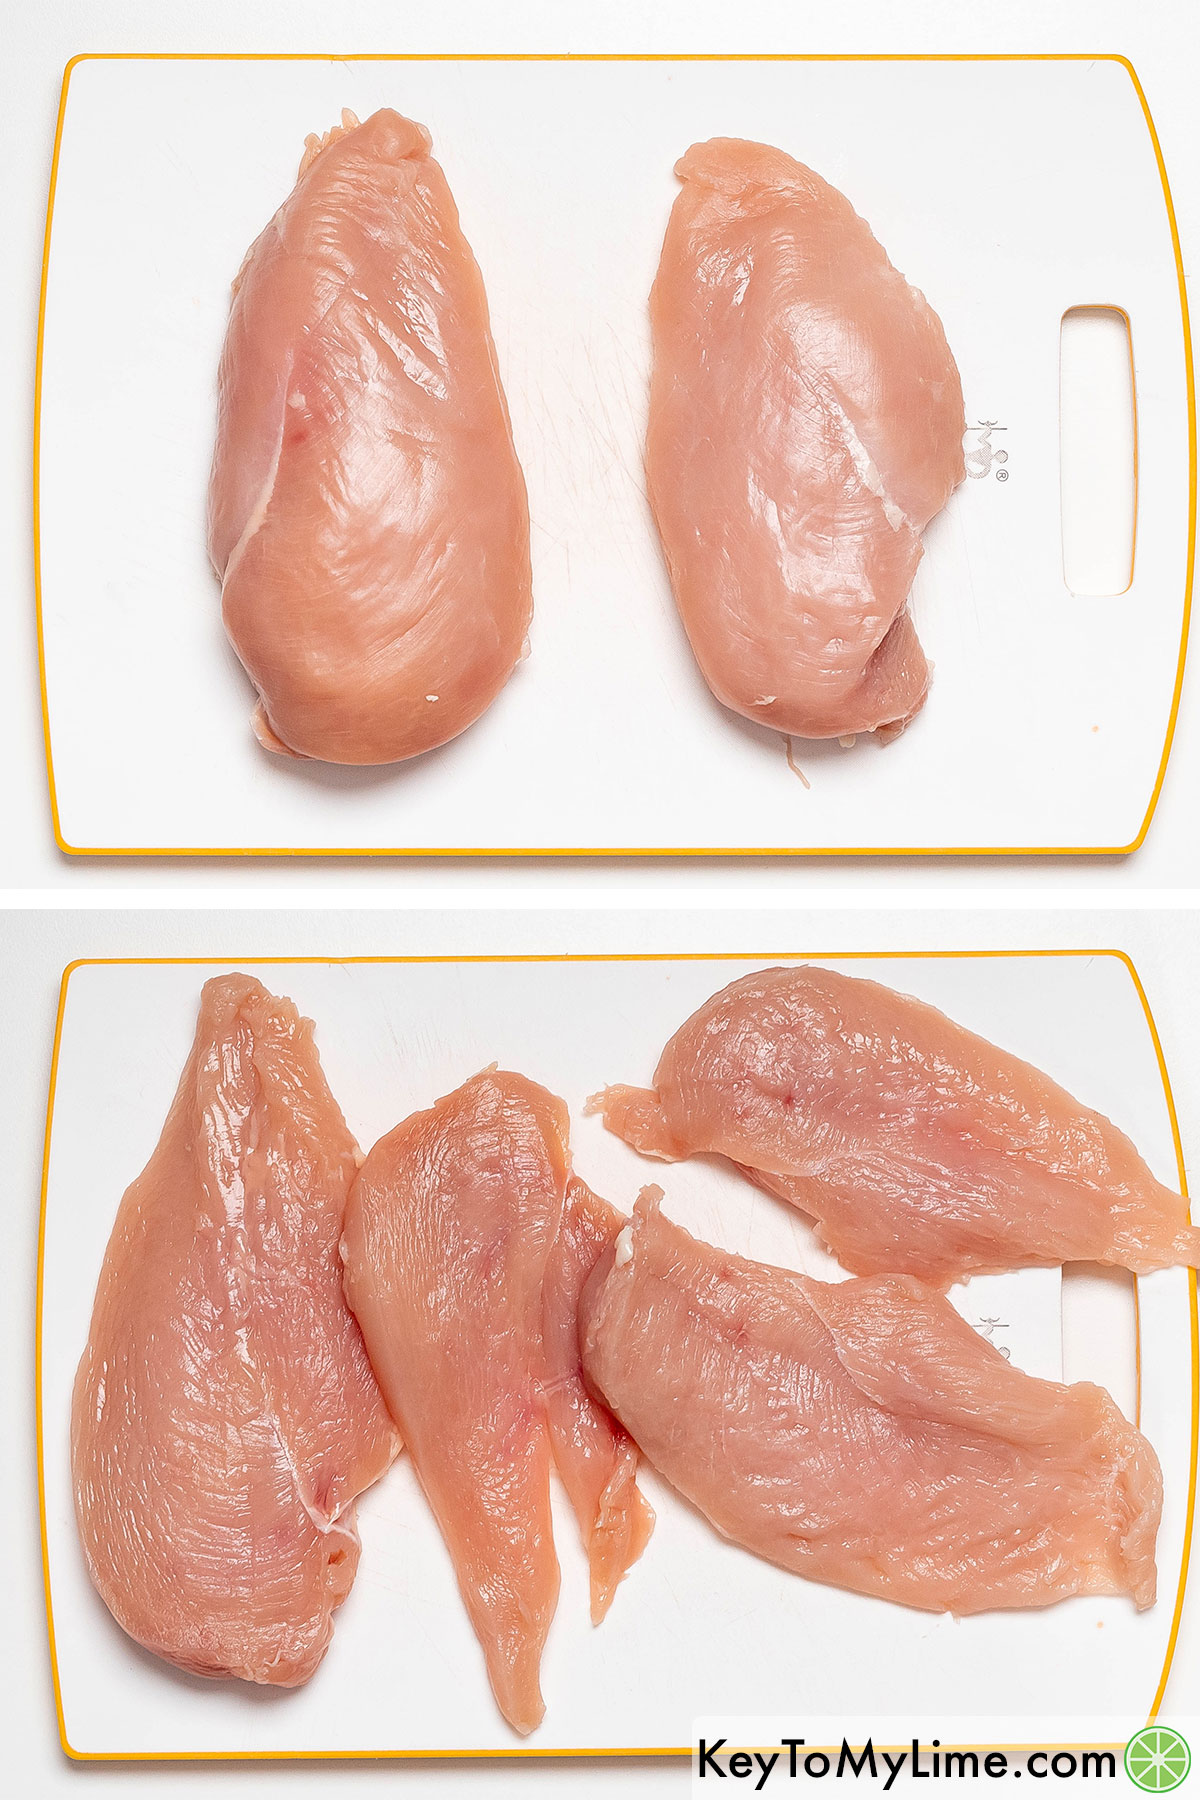 Butterflying the chicken breast into four filets.